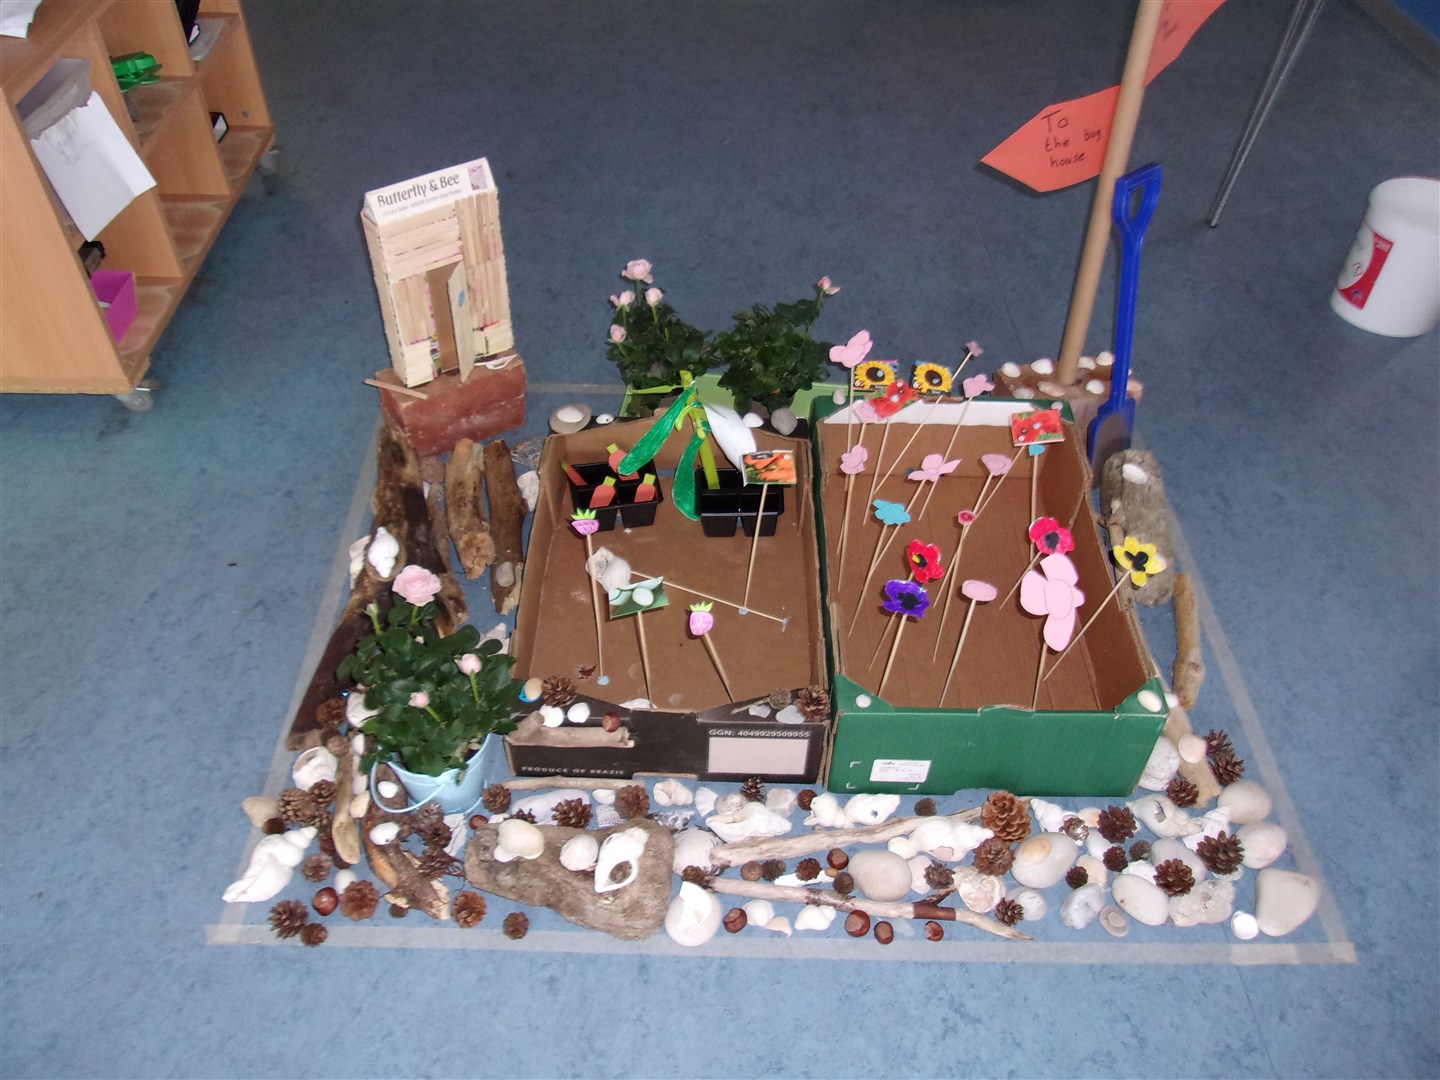 Pupils dug deep into their imagination for some great designs.